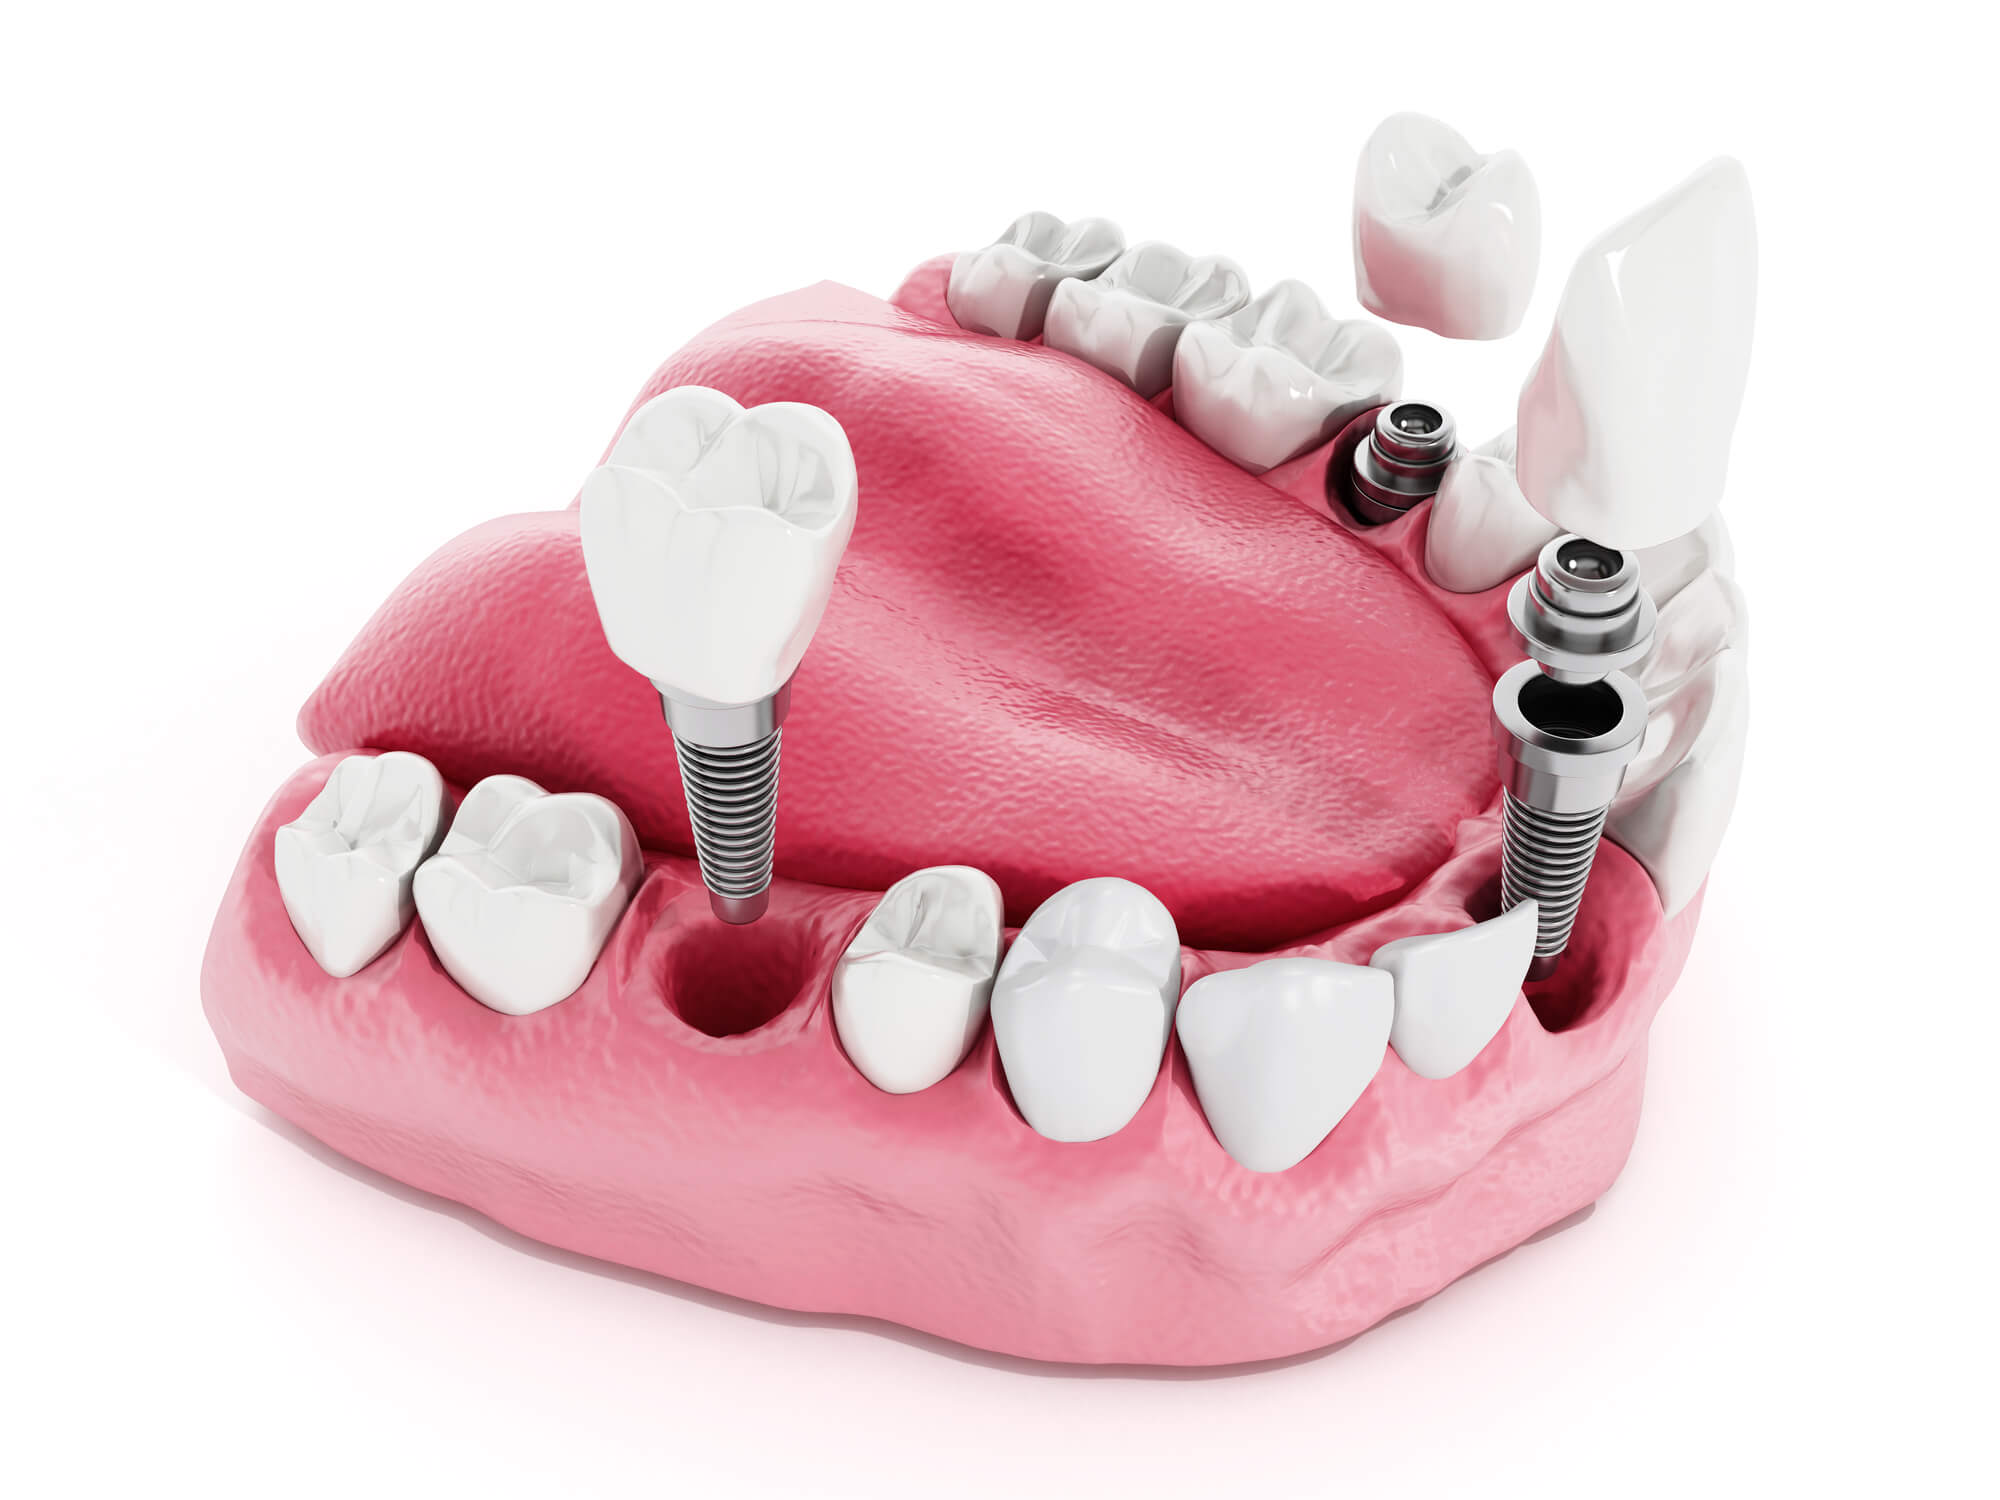 multiple missing teeth affecting the Cost for Dental Implants